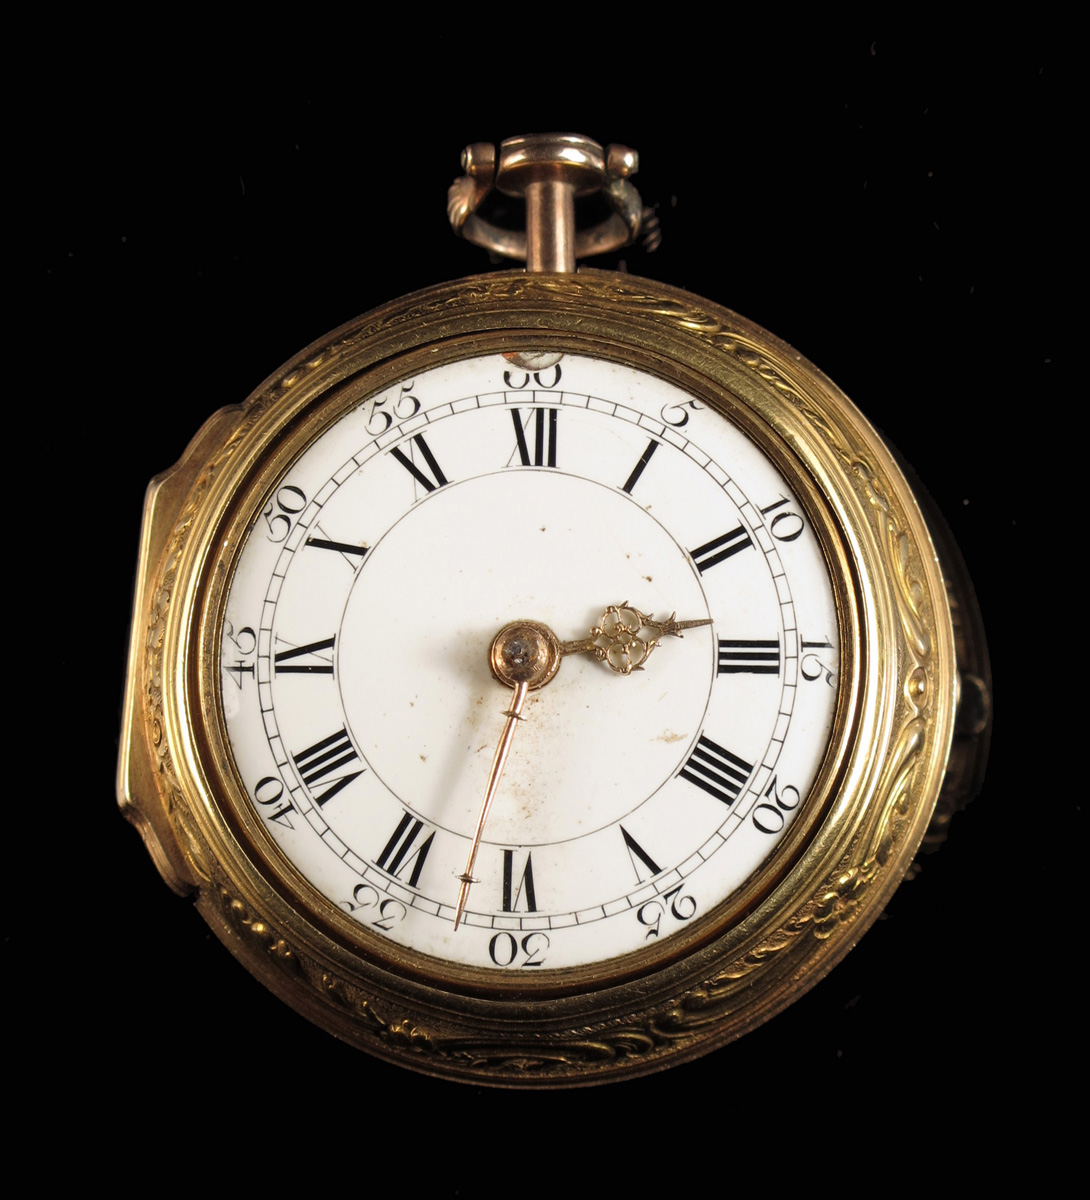 A gold repousse pair cased cylinder watch, signed Spencer & Perkins, London, no. 7528, diamond